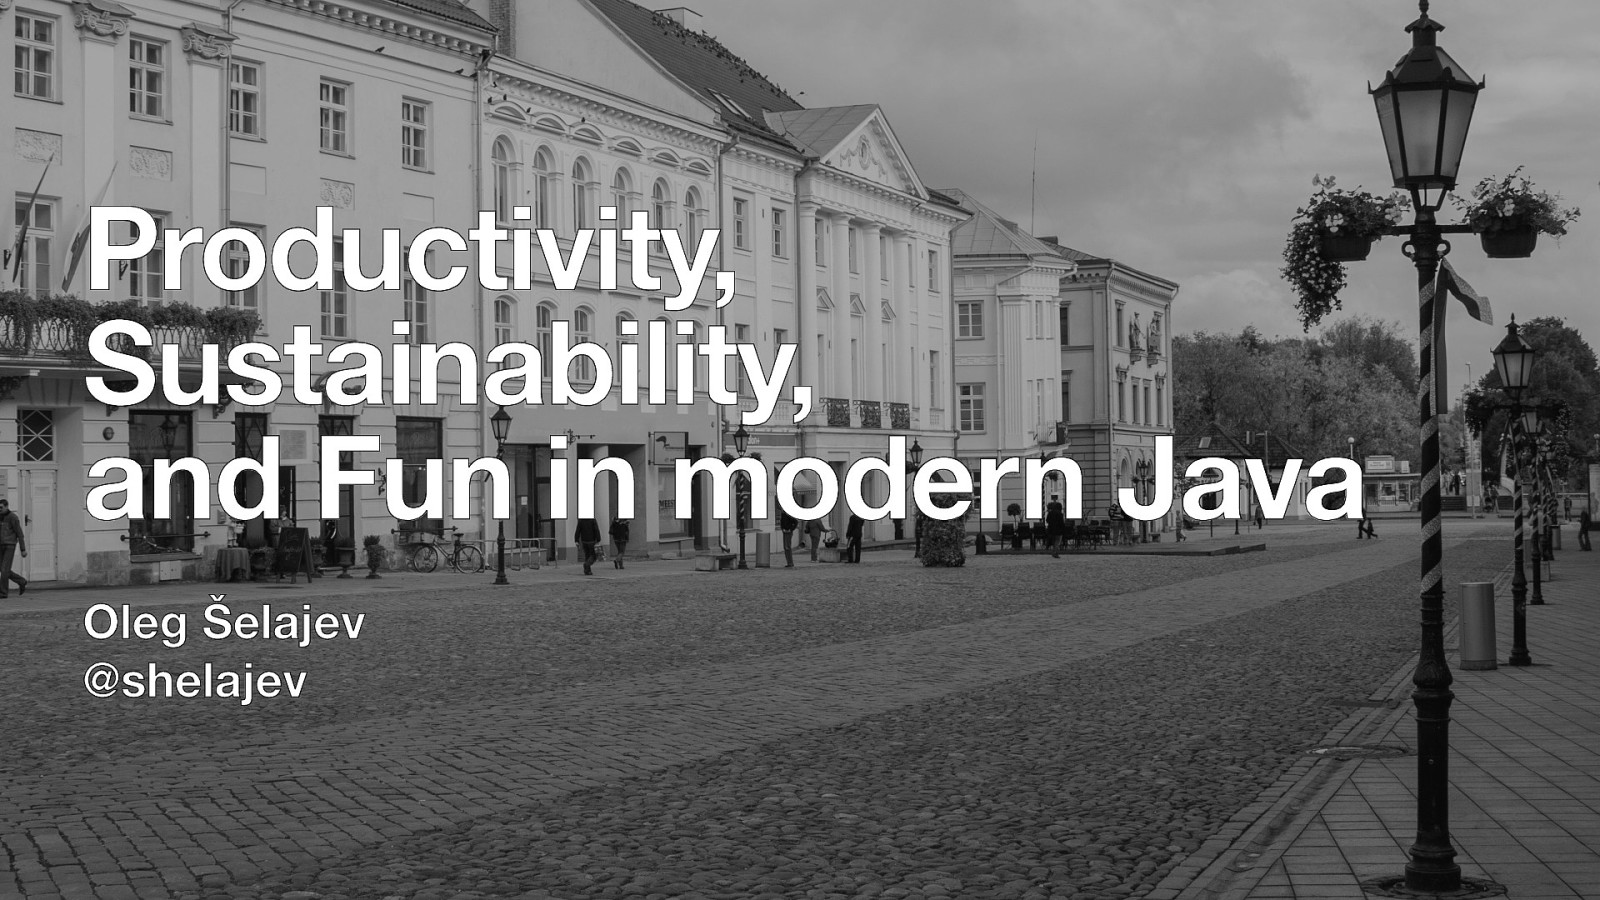 Productivity, Sustainability, and Fun in modern Java